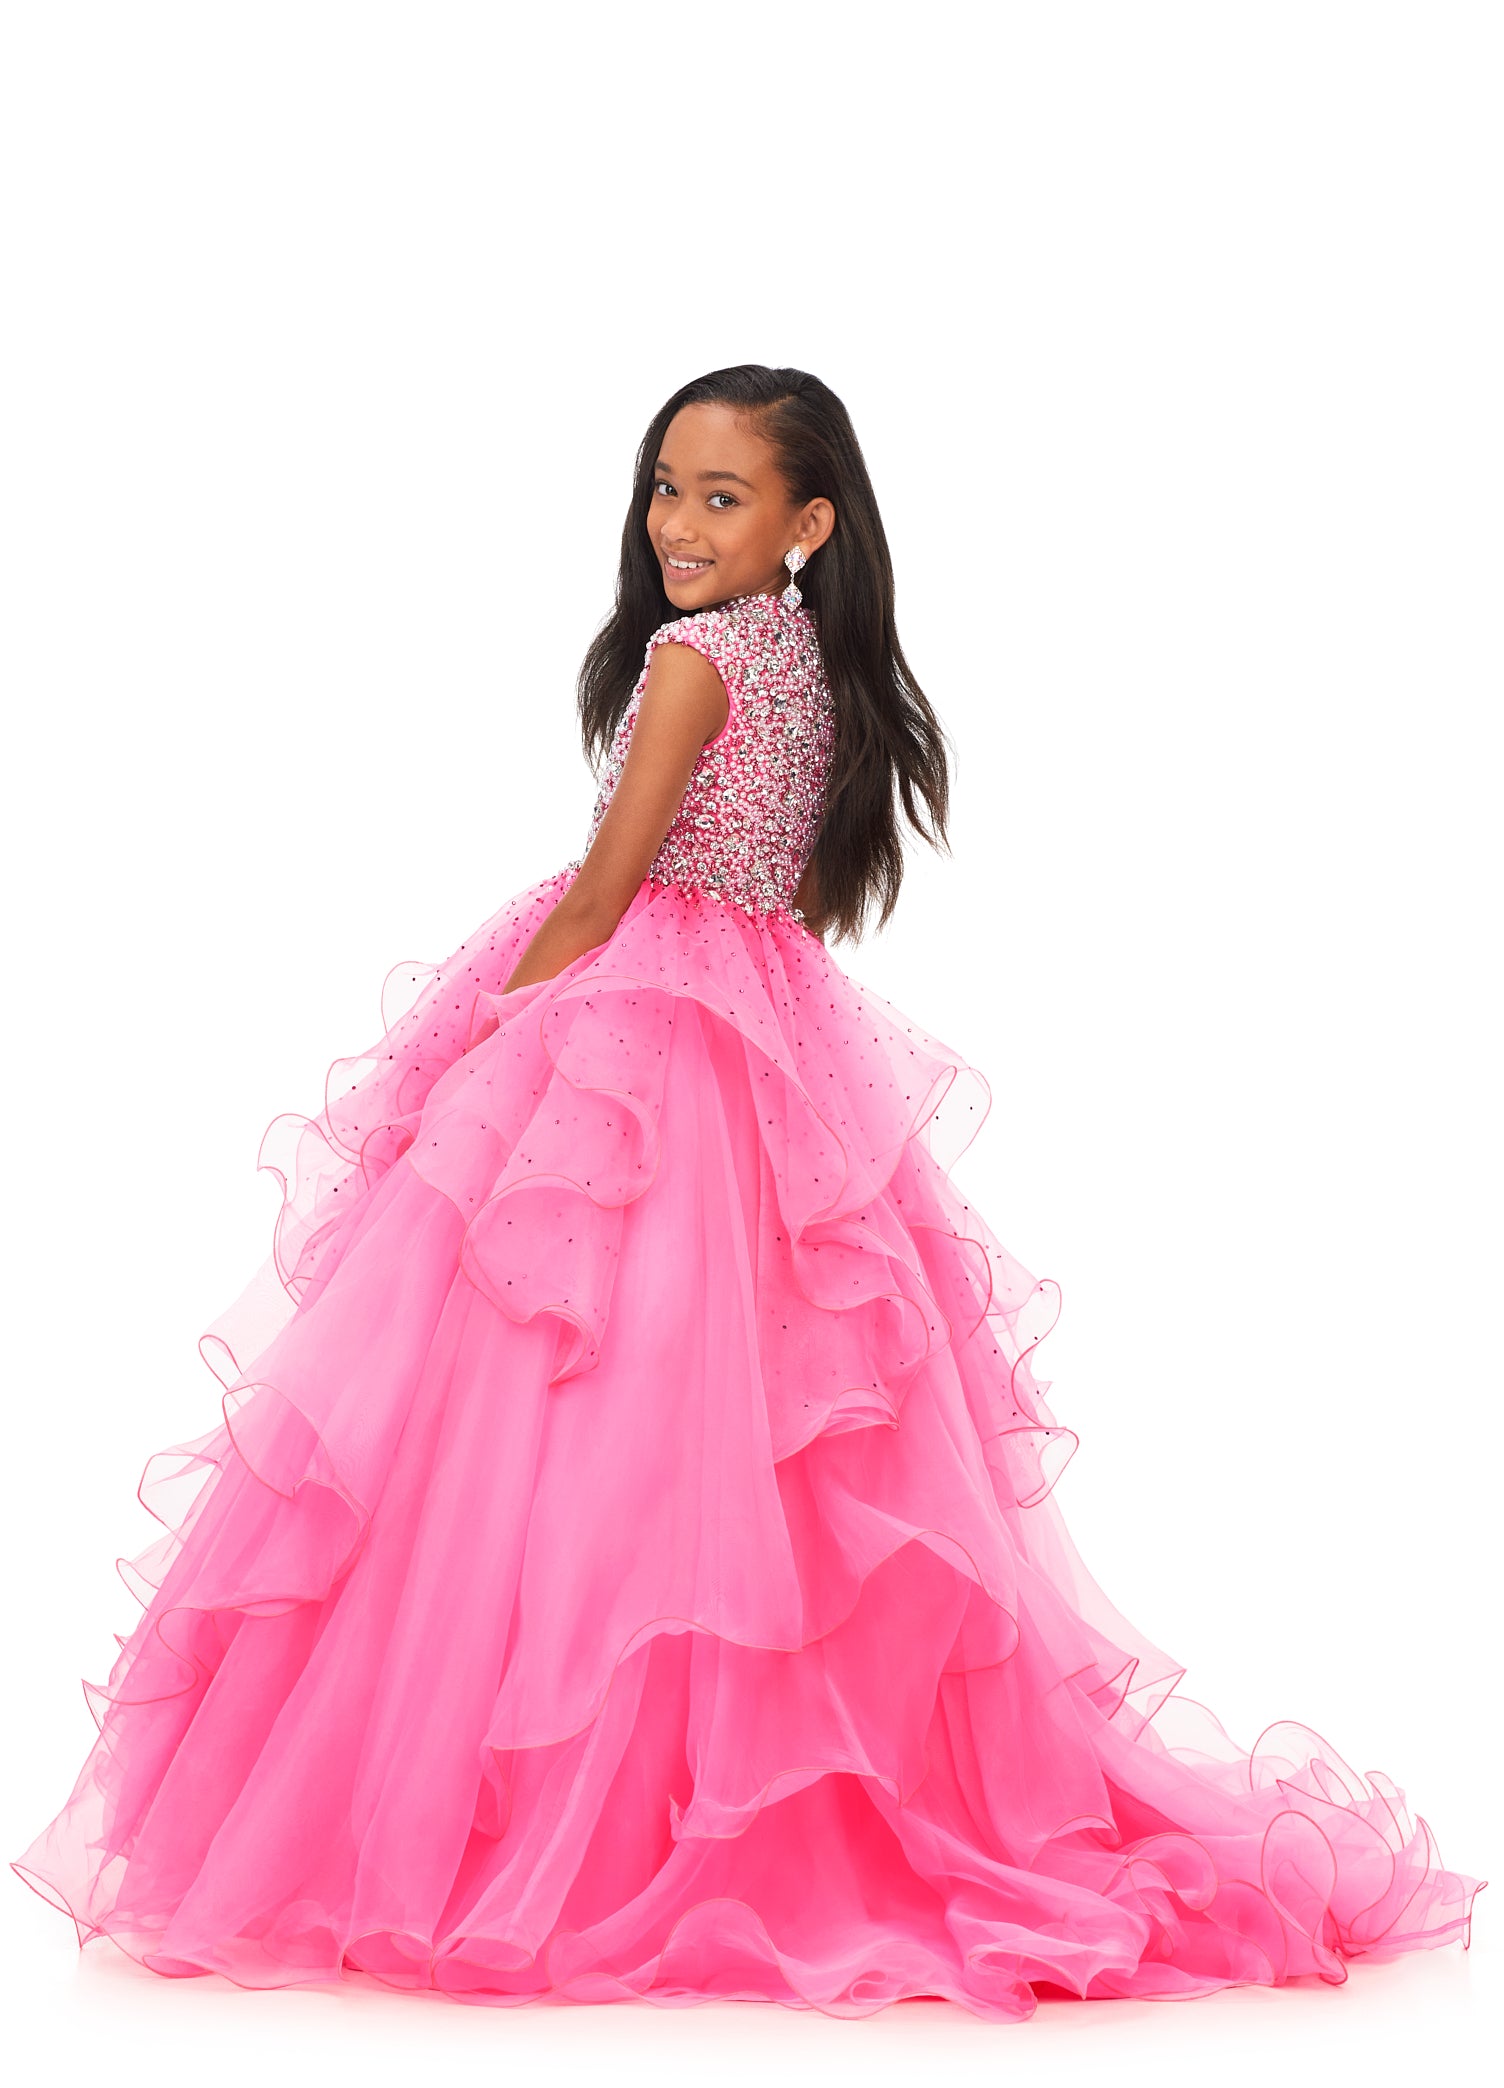 Ashley Lauren Kids 8180 Girls High Neckline Ball Gown with Organza Ruffle Pageant Skirt  Make them stop and stare in this kids high neckline ball gown with cap sleeves. The fully encrusted crystal and pearl bodice is sure to have all eyes on you. The a-line organza ruffle skirt is complete with scattered heat set stones throughout.